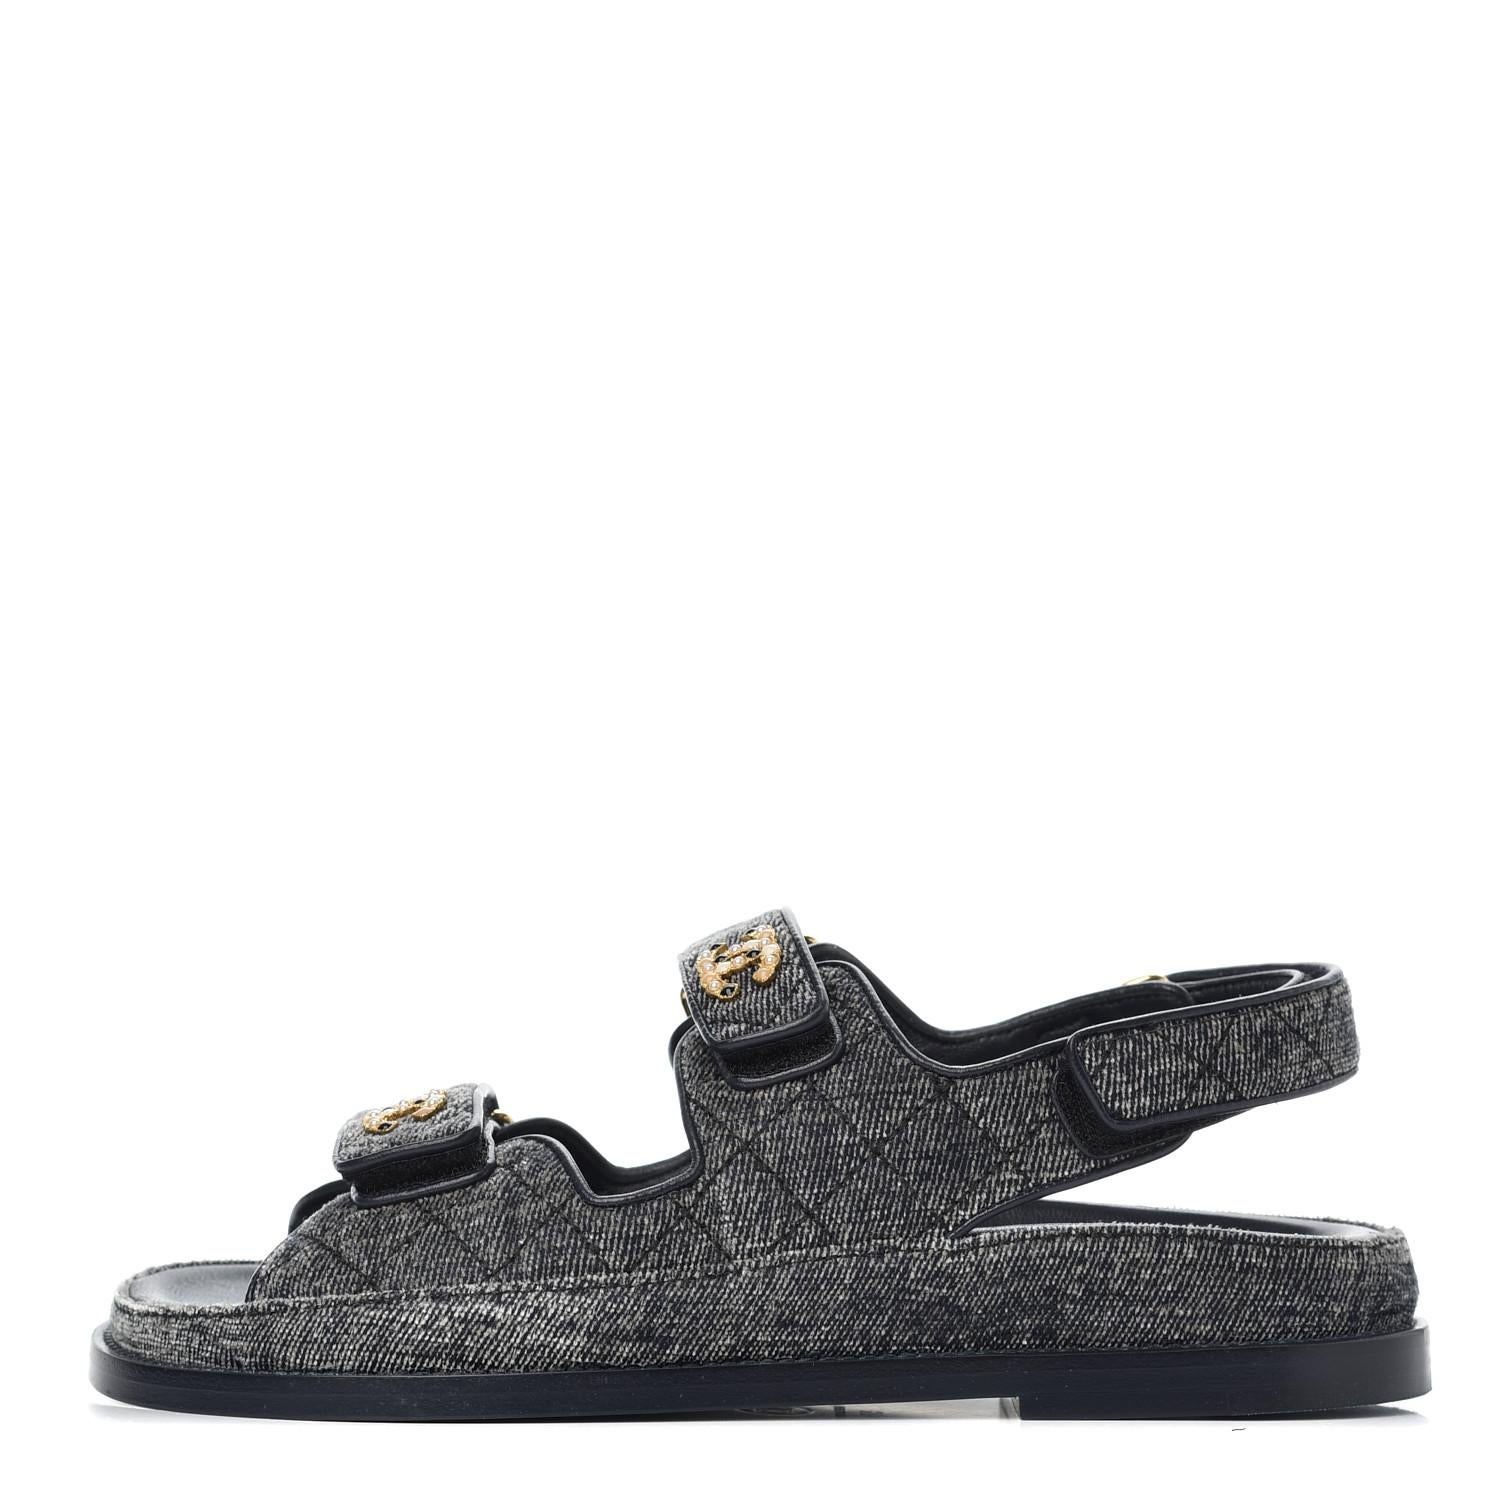 Chanel Denim Grey Velvet Pearl CC Dad Sandals Size 40 New in Box For Sale 1